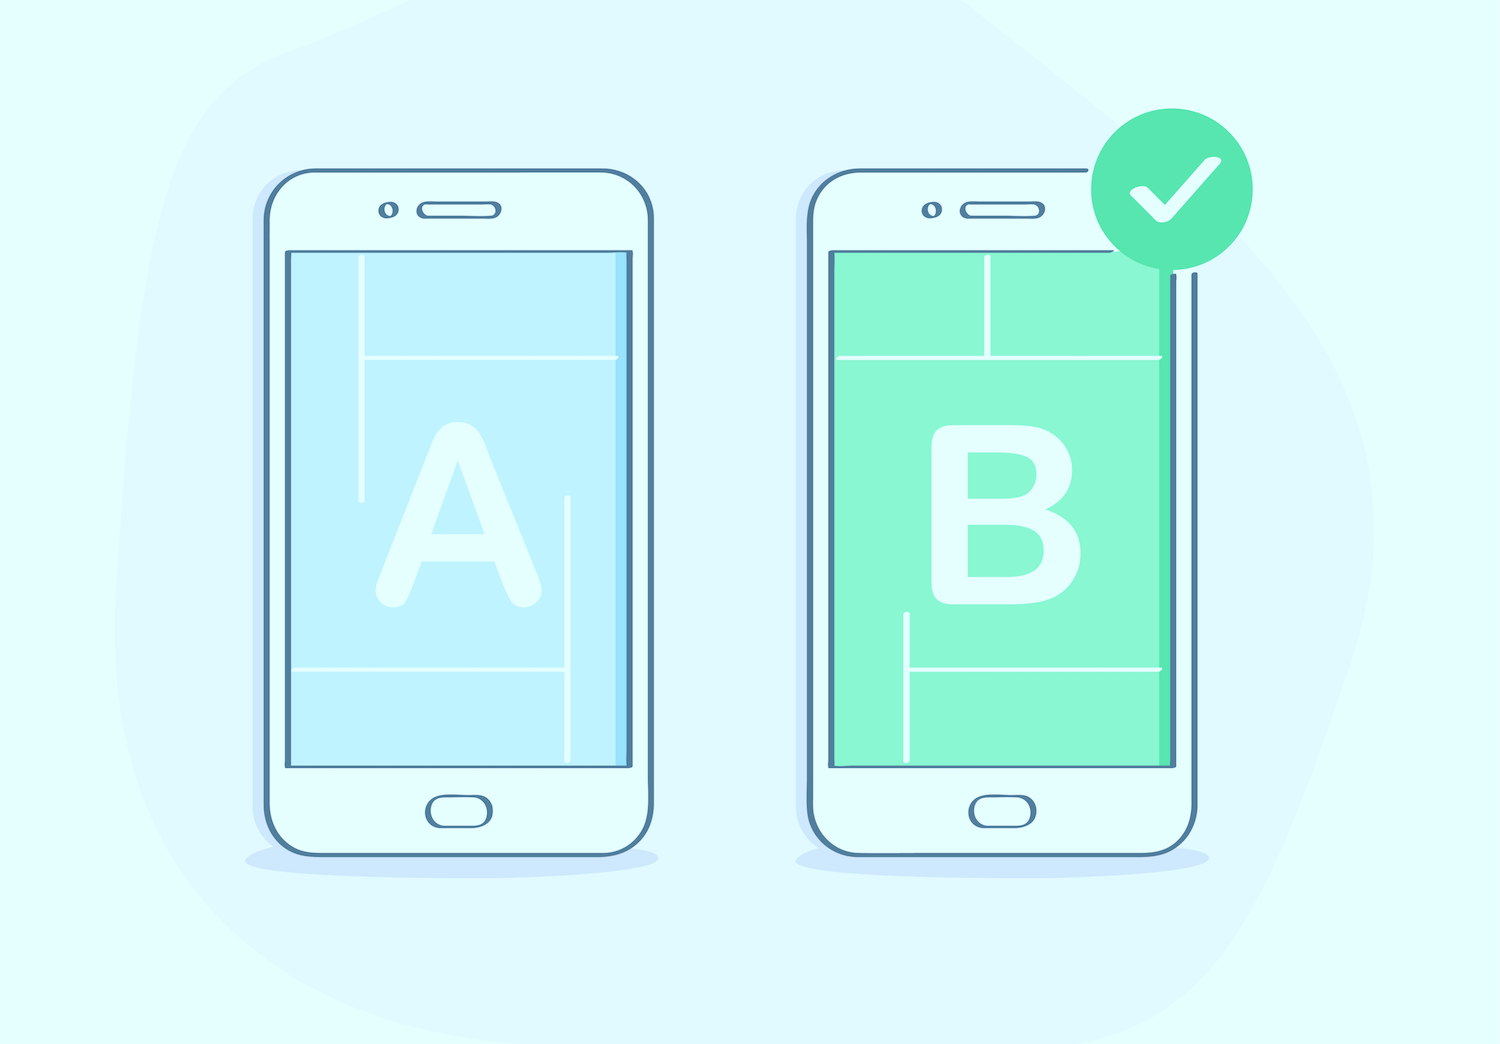 Design thinking can be seen as a complement to A/B testing.